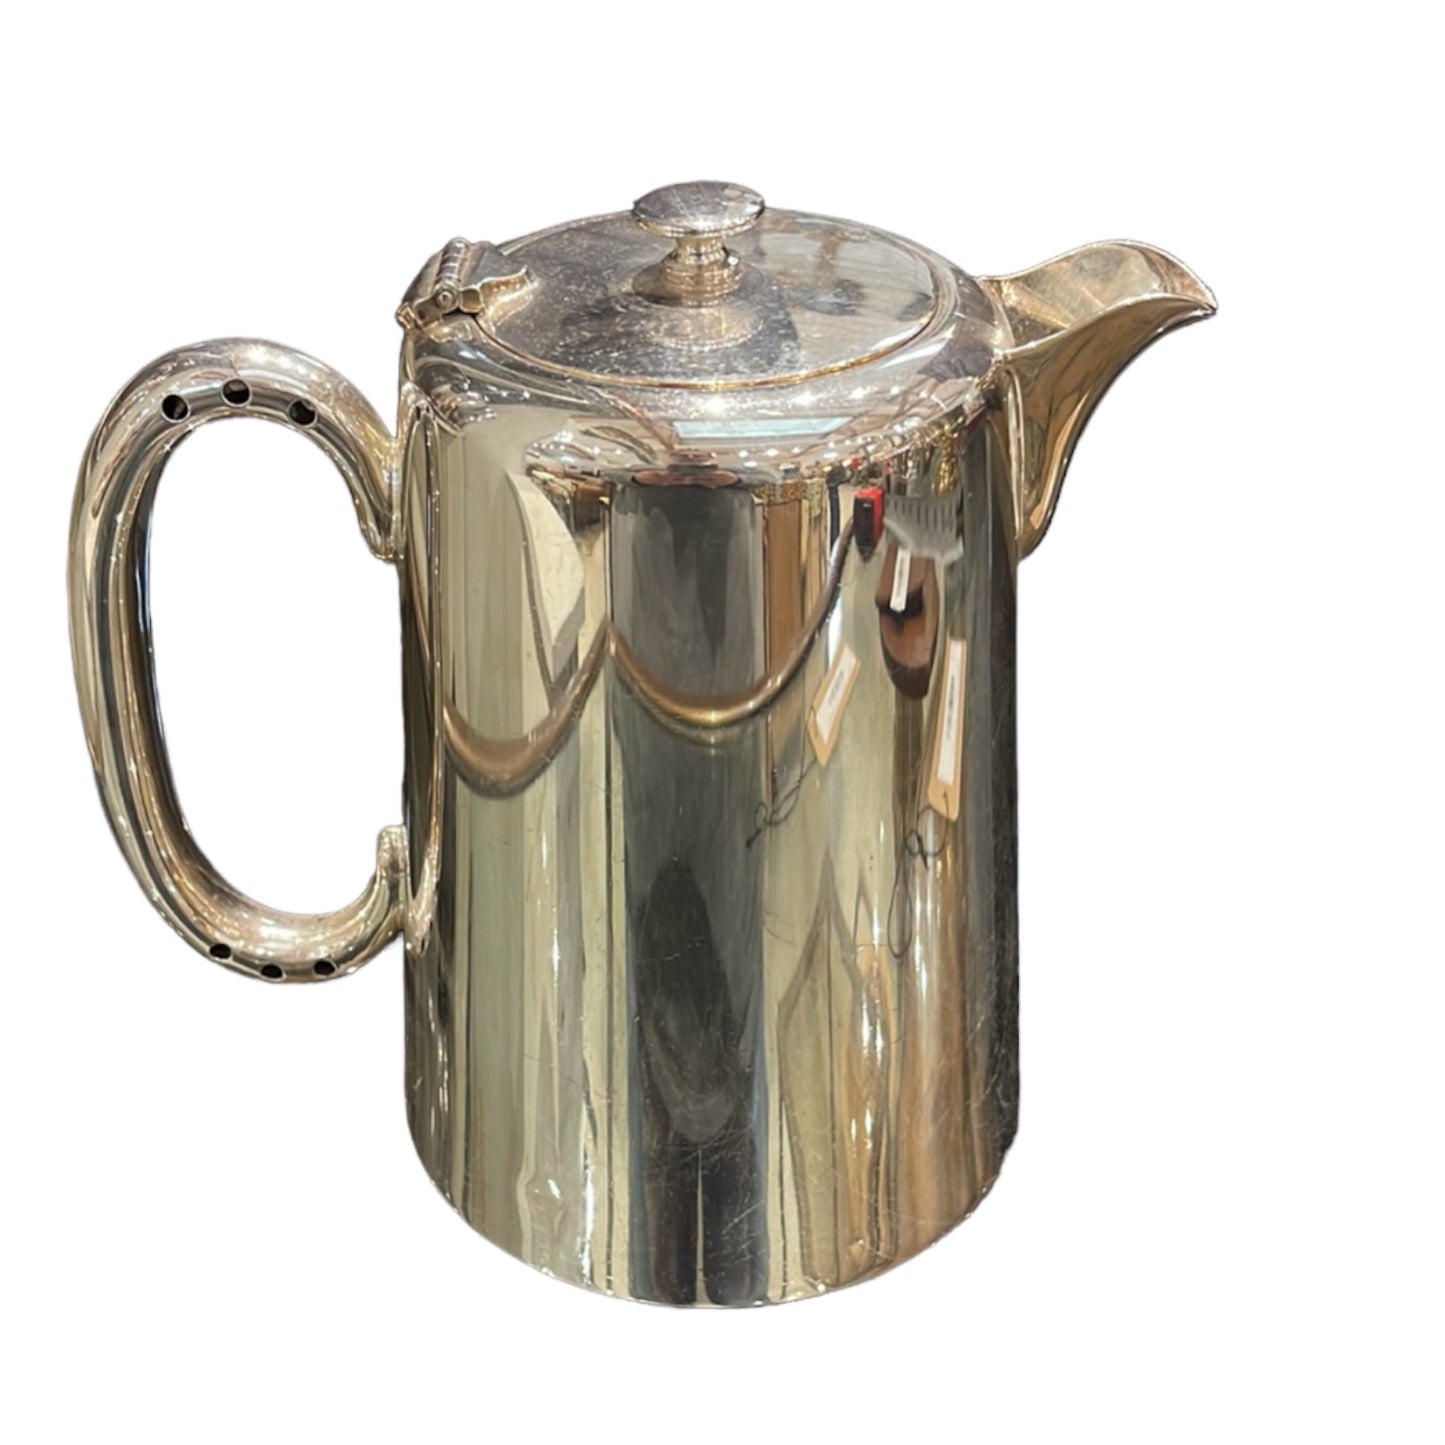 Silverplate Hotelware Pitcher